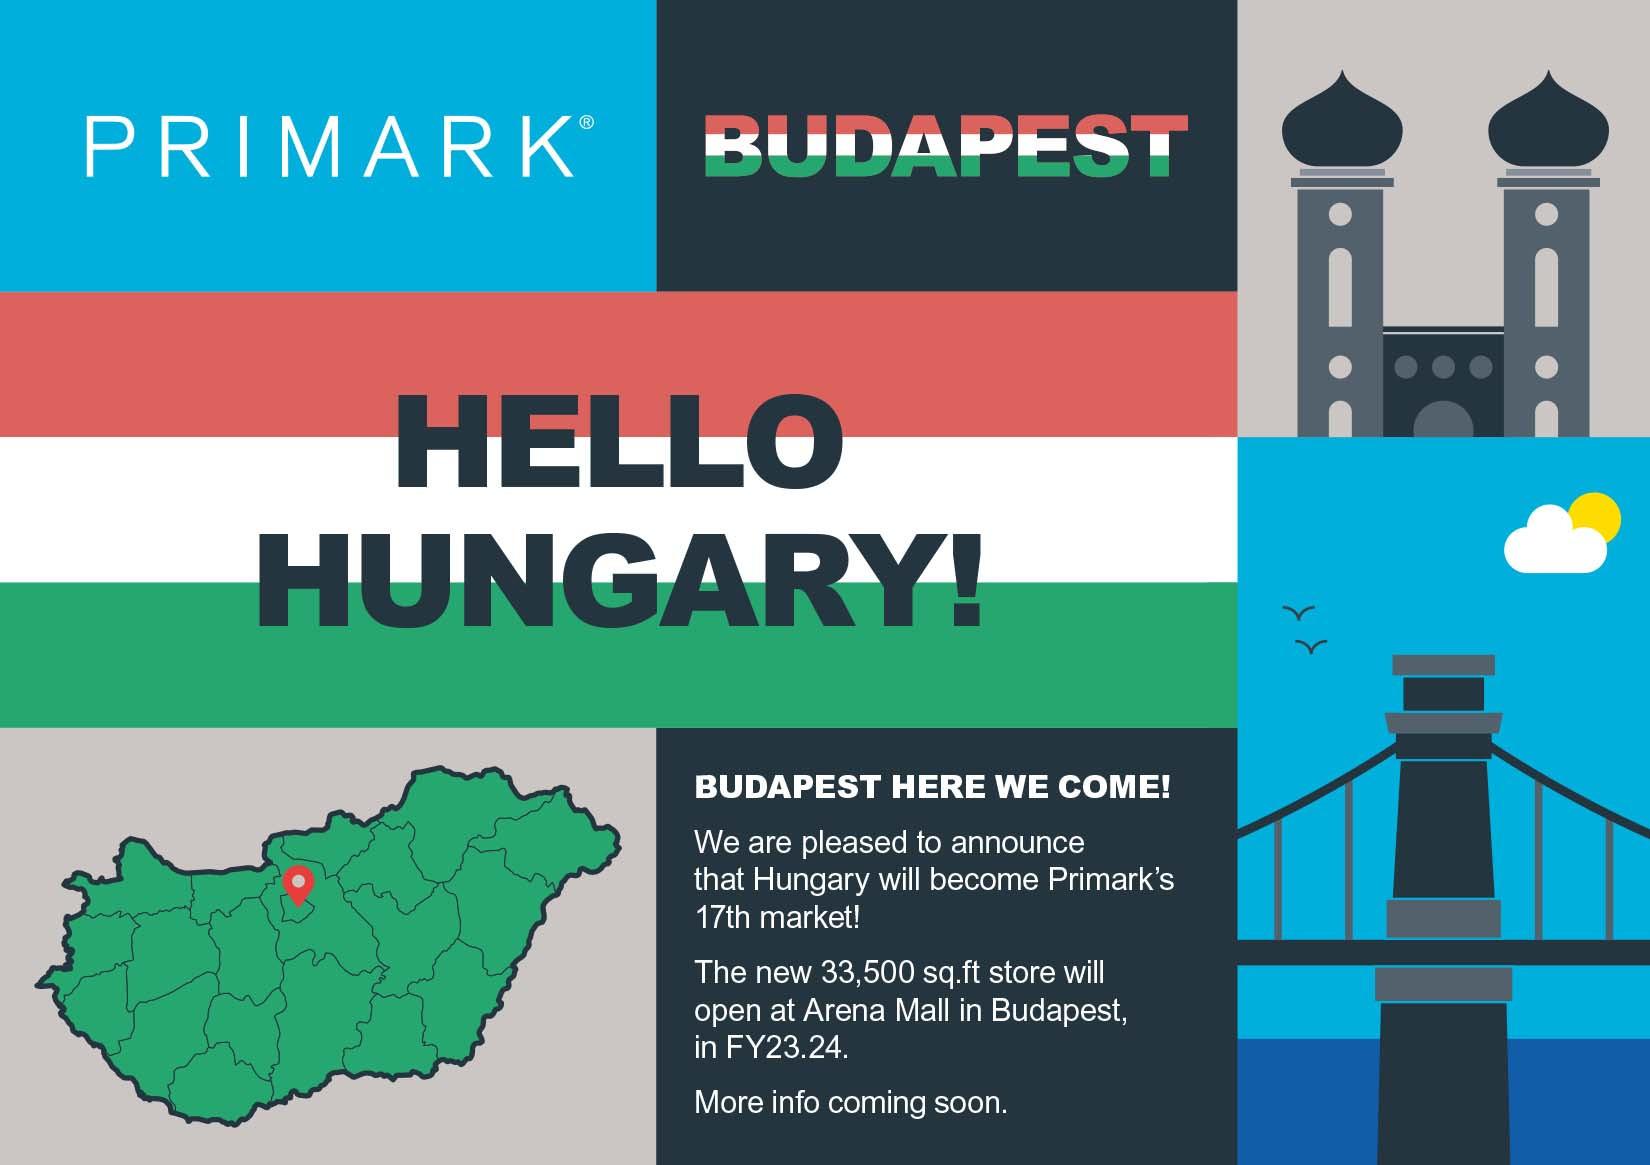 Primark confirms it will open its first store in Hungary